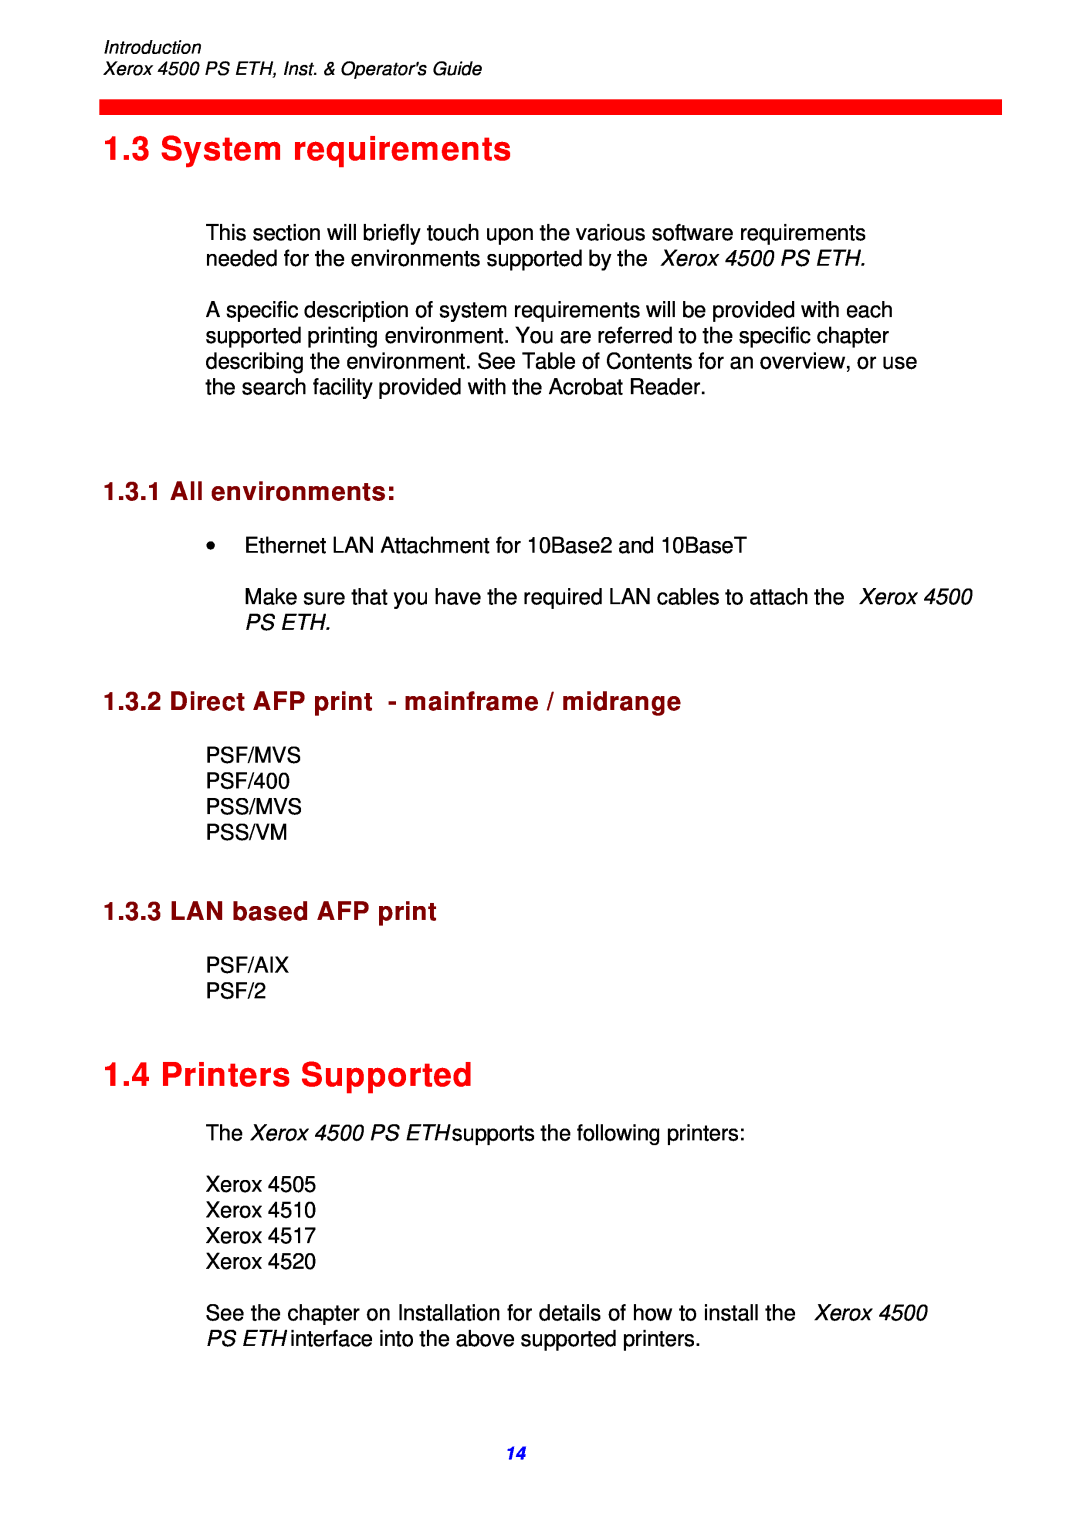 Xerox 4500 ps eth System requirements, Printers Supported, All environments, Direct AFP print - mainframe / midrange 